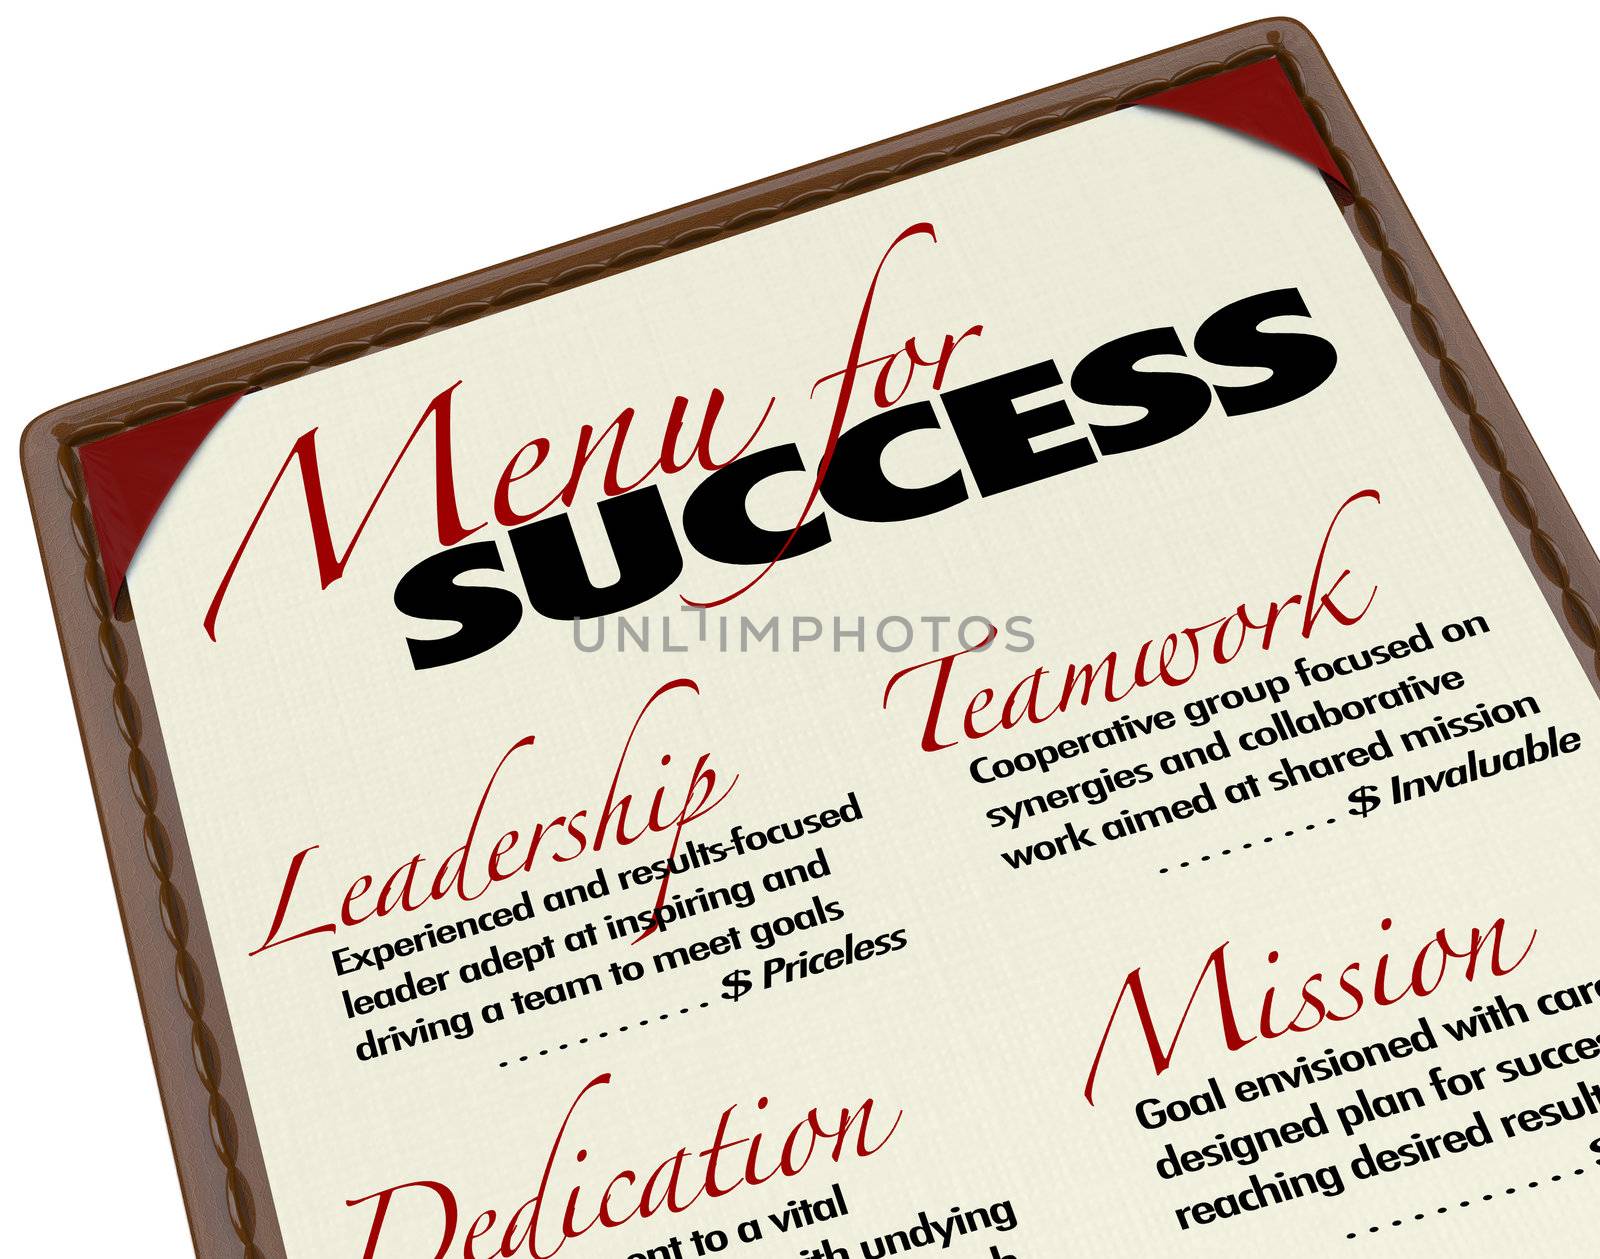 A Menu for Success shows what is offered to you in achieving your goals - Leadership, Teamwork, Dedication and Mission - all elements required for successful business or life